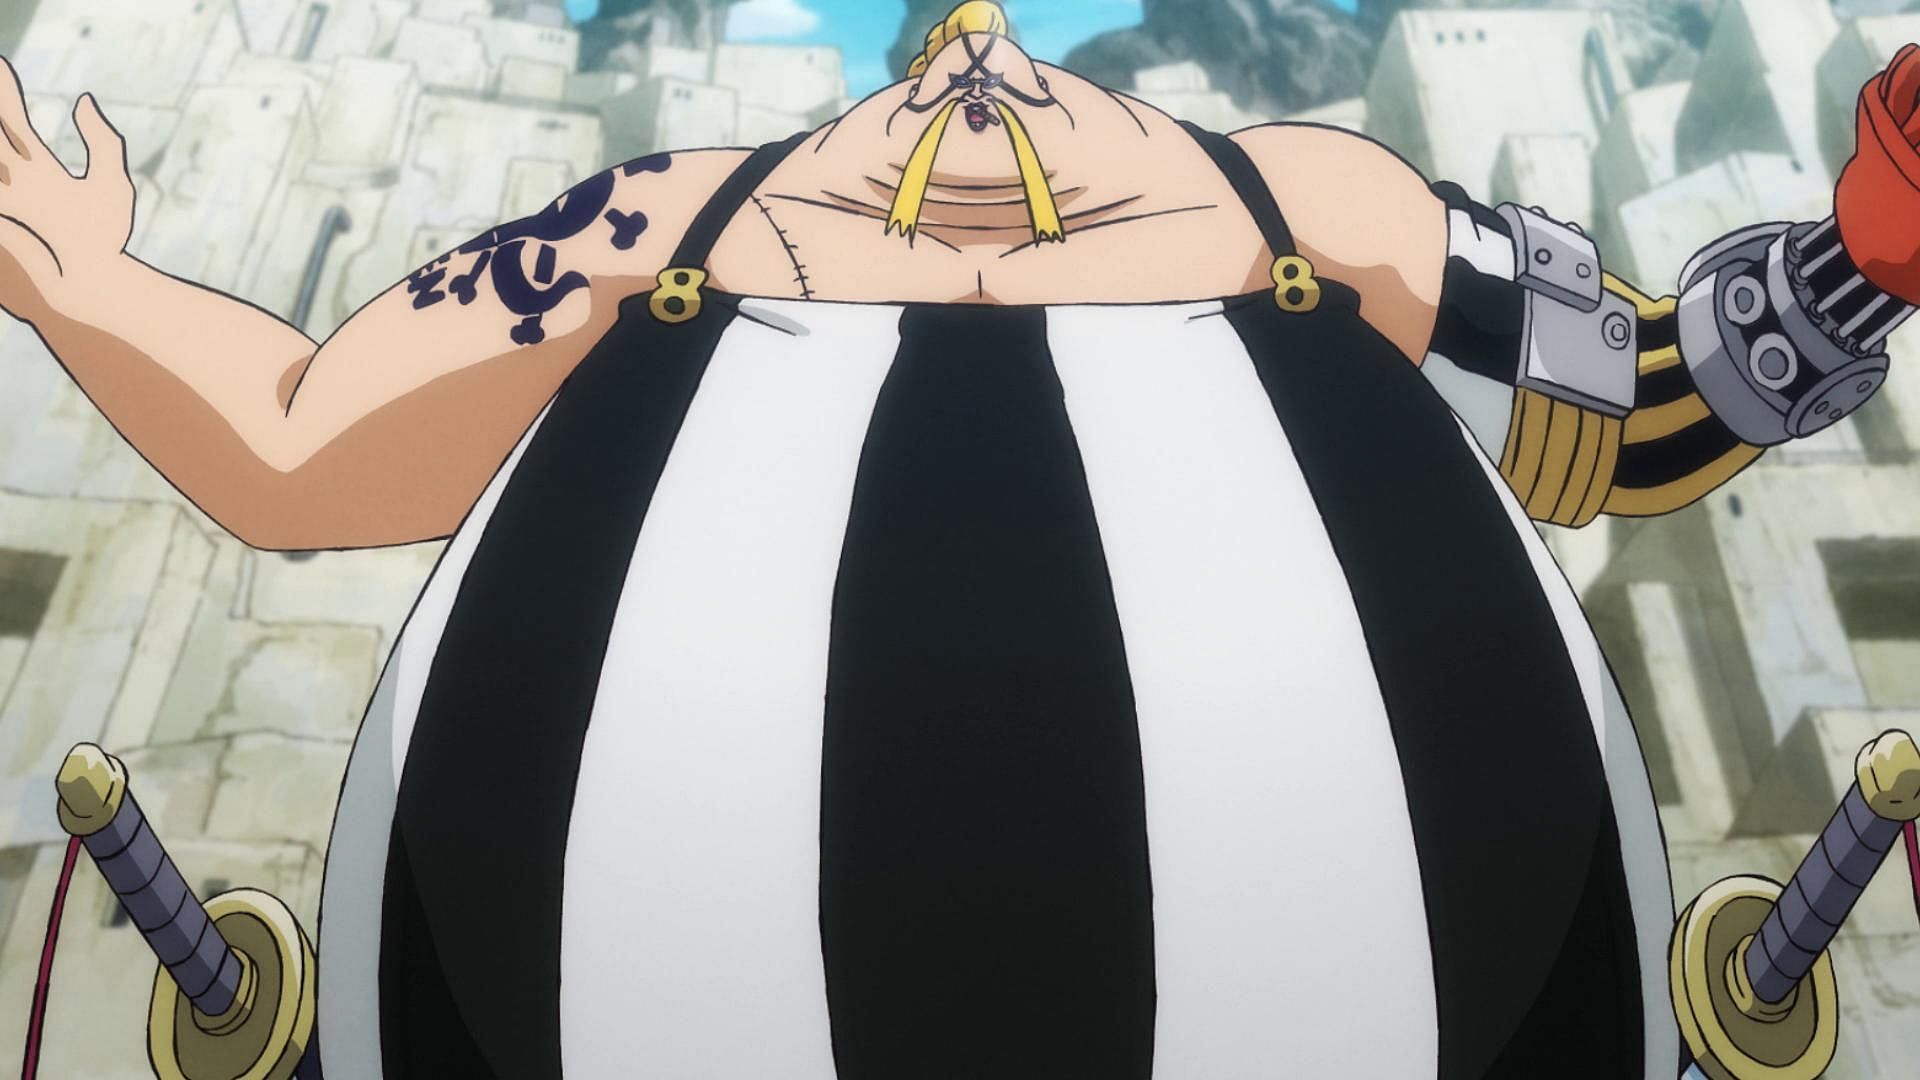 Queen as seen in the One Piece anime (Image via Toei Animation)